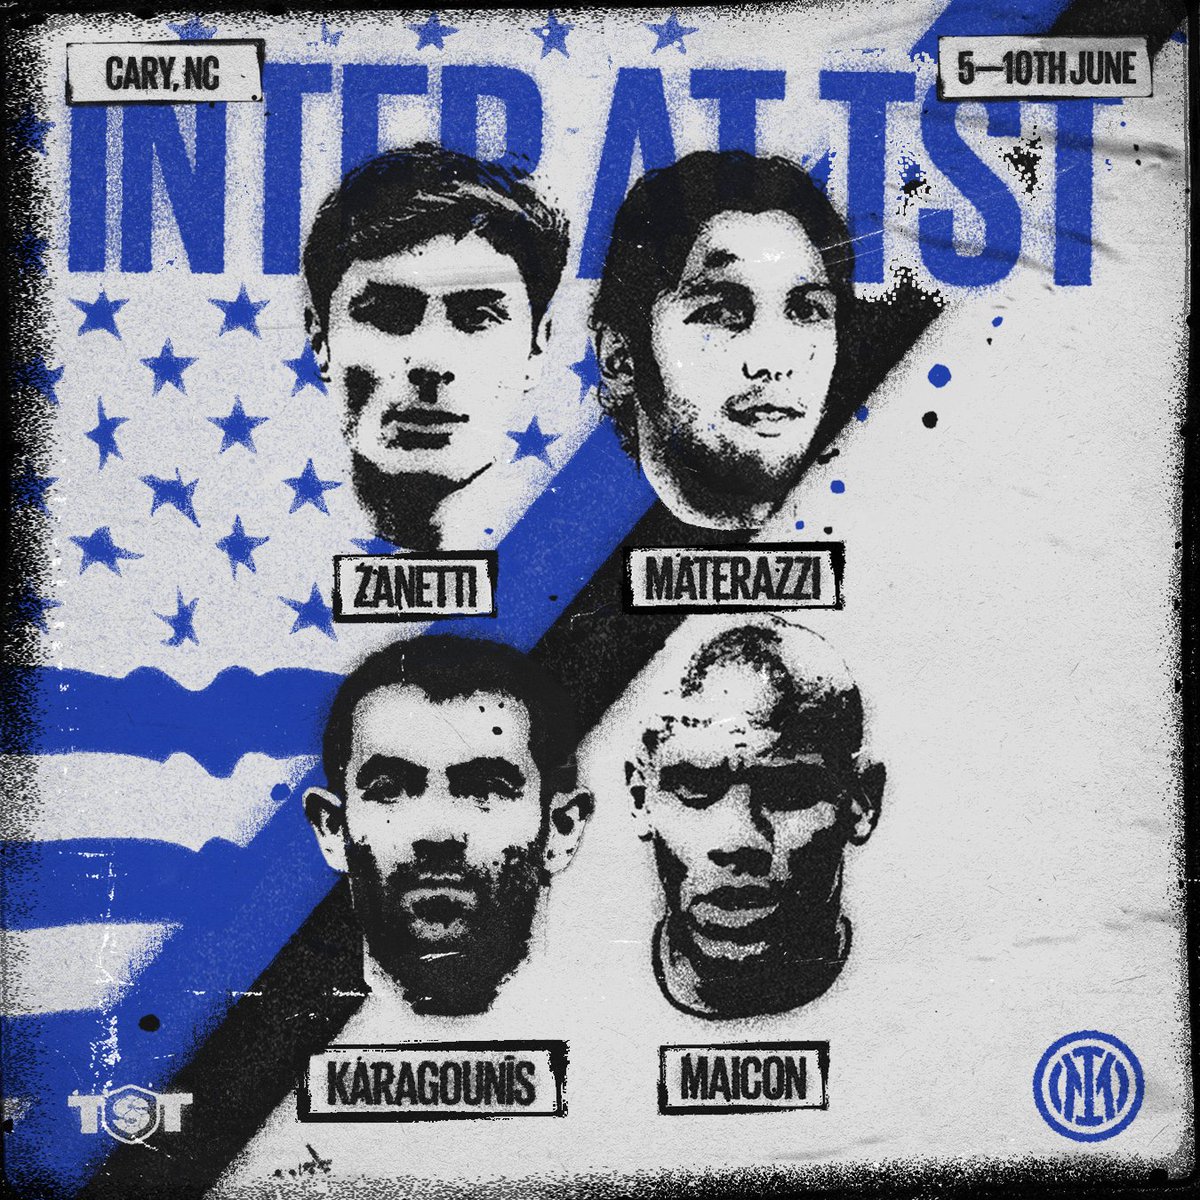 Inter will head to the USA for The Soccer Tournament ✈️🇺🇸
Between 5 and 10 June, the Club will take part in the second edition of the prestigious 7-a-side tournament with a selection of #InterLegends alongside #InterAcademy, #InterClub and #InterCampus players ⚽🖤💙

Discover…